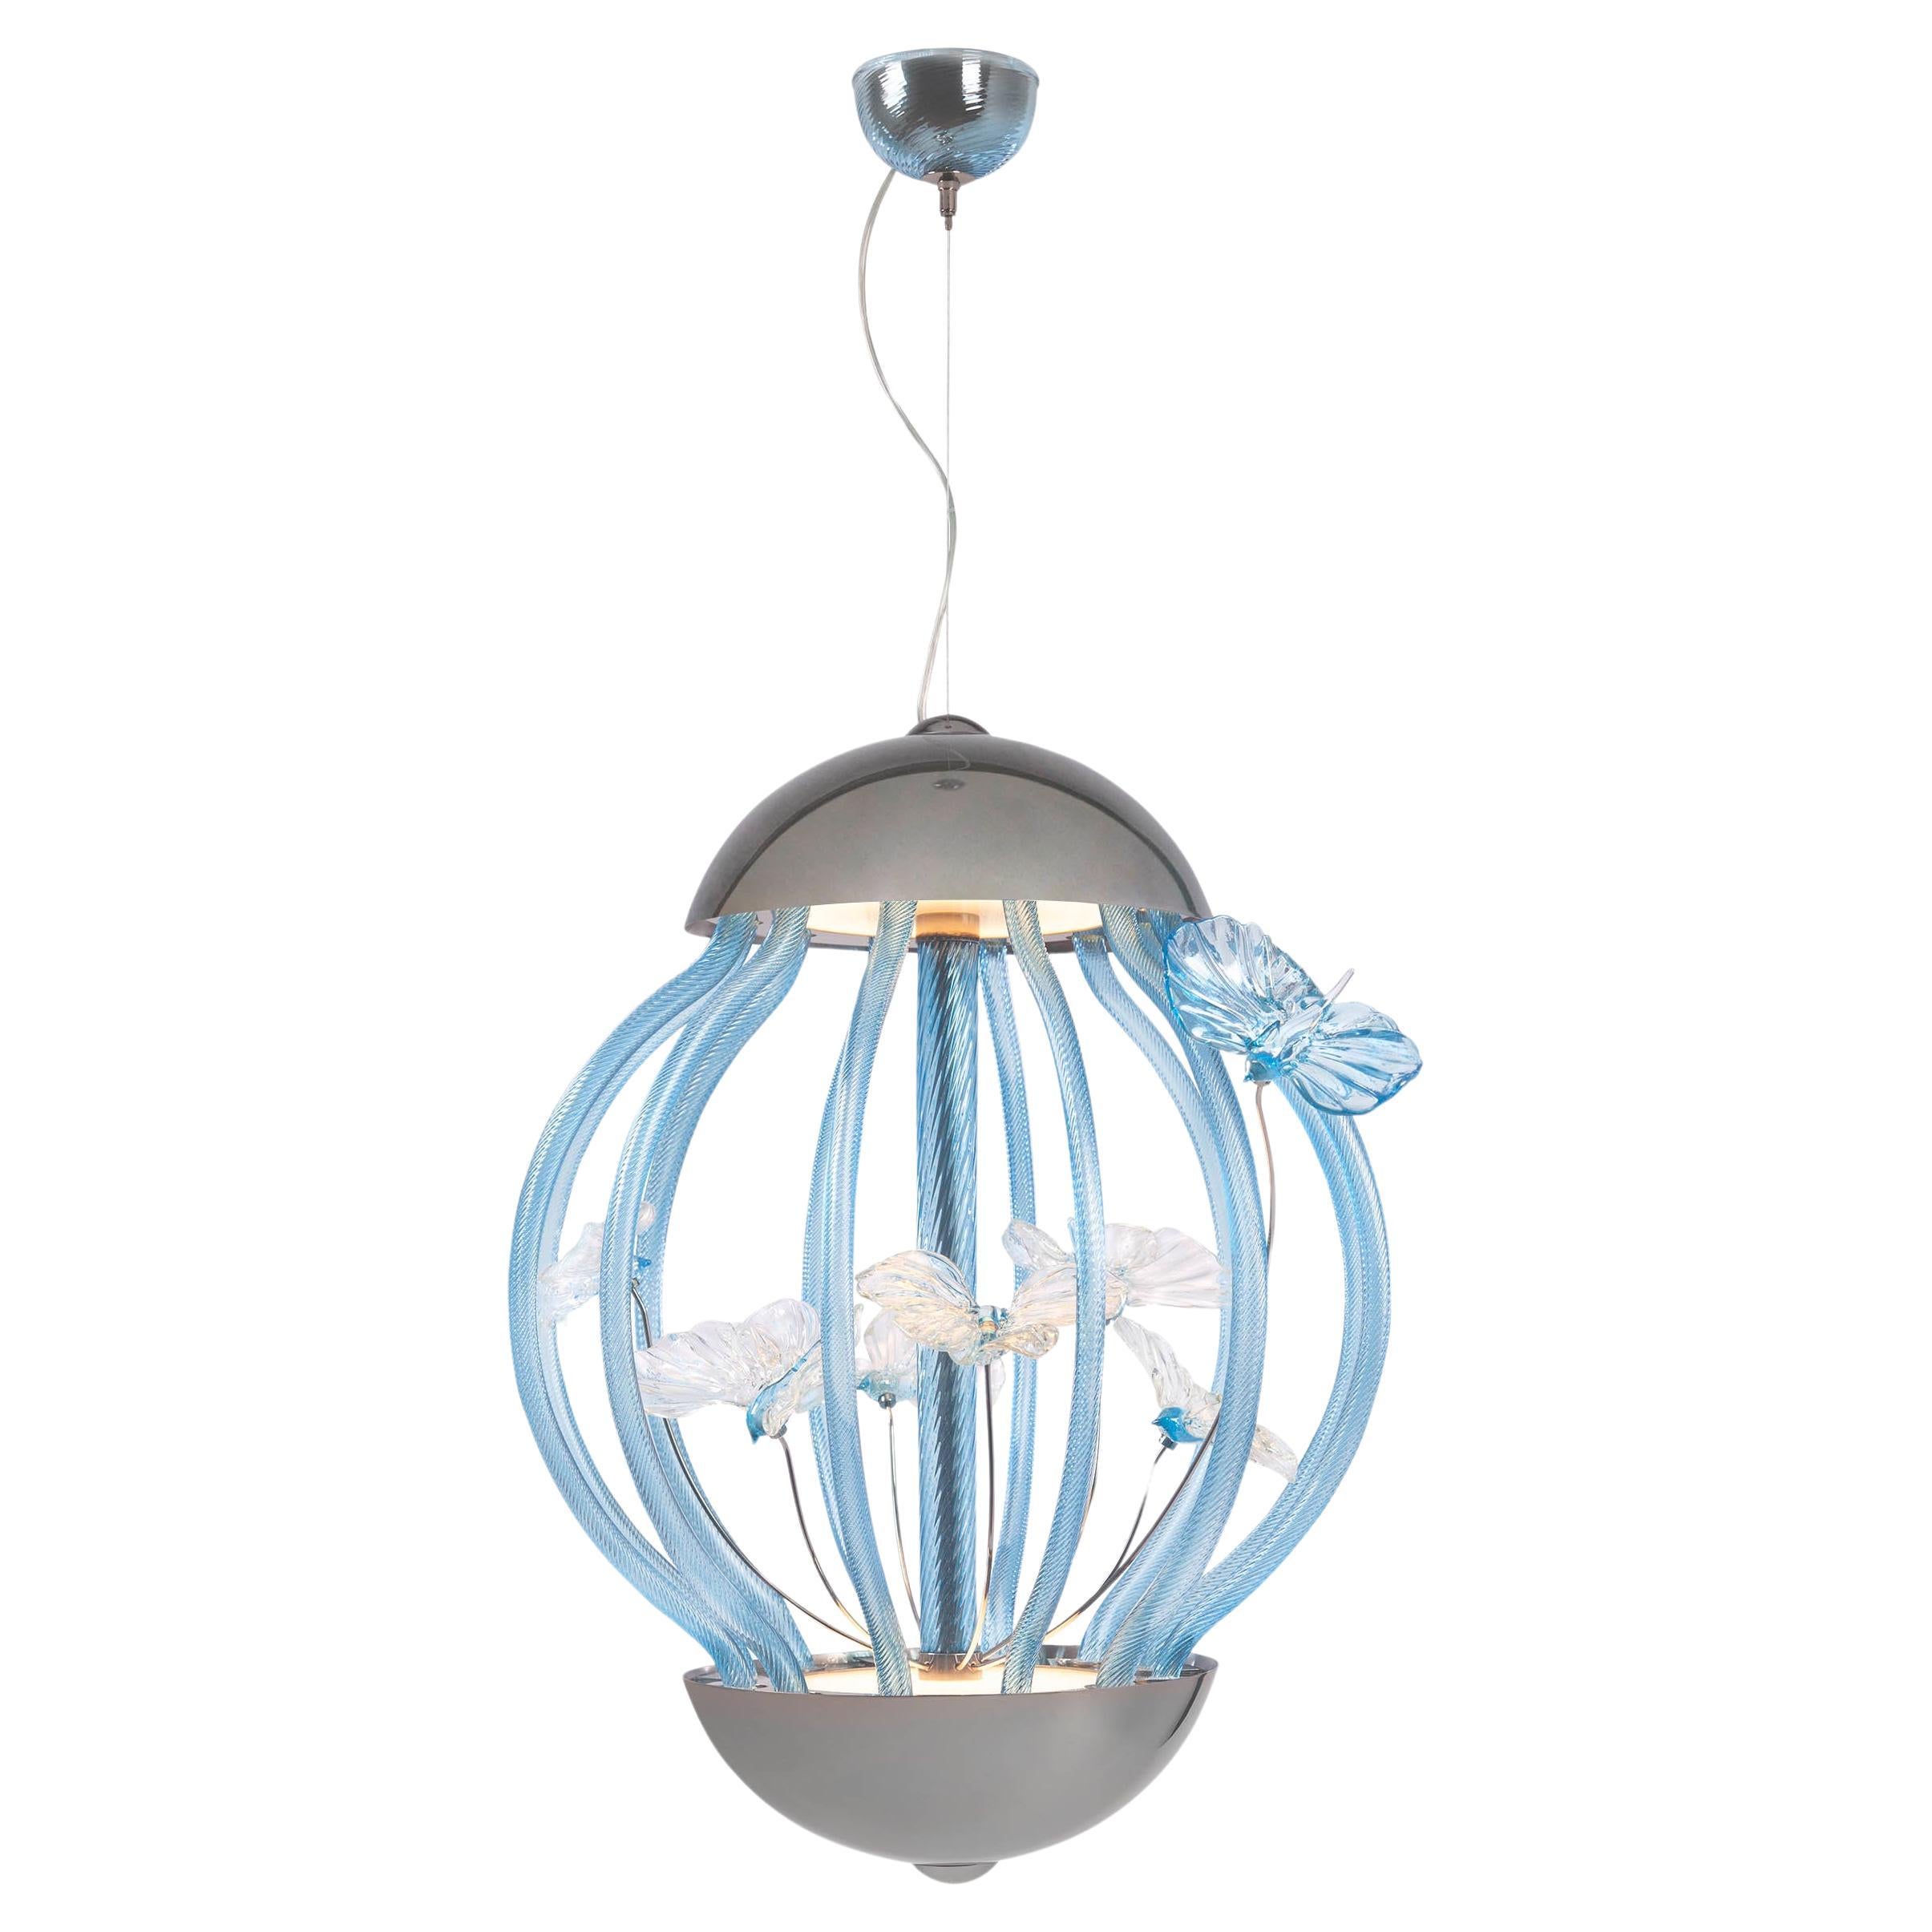 Art Design Pendant lamp Cage with butterflies in Blue Murano Glass by Multiforme